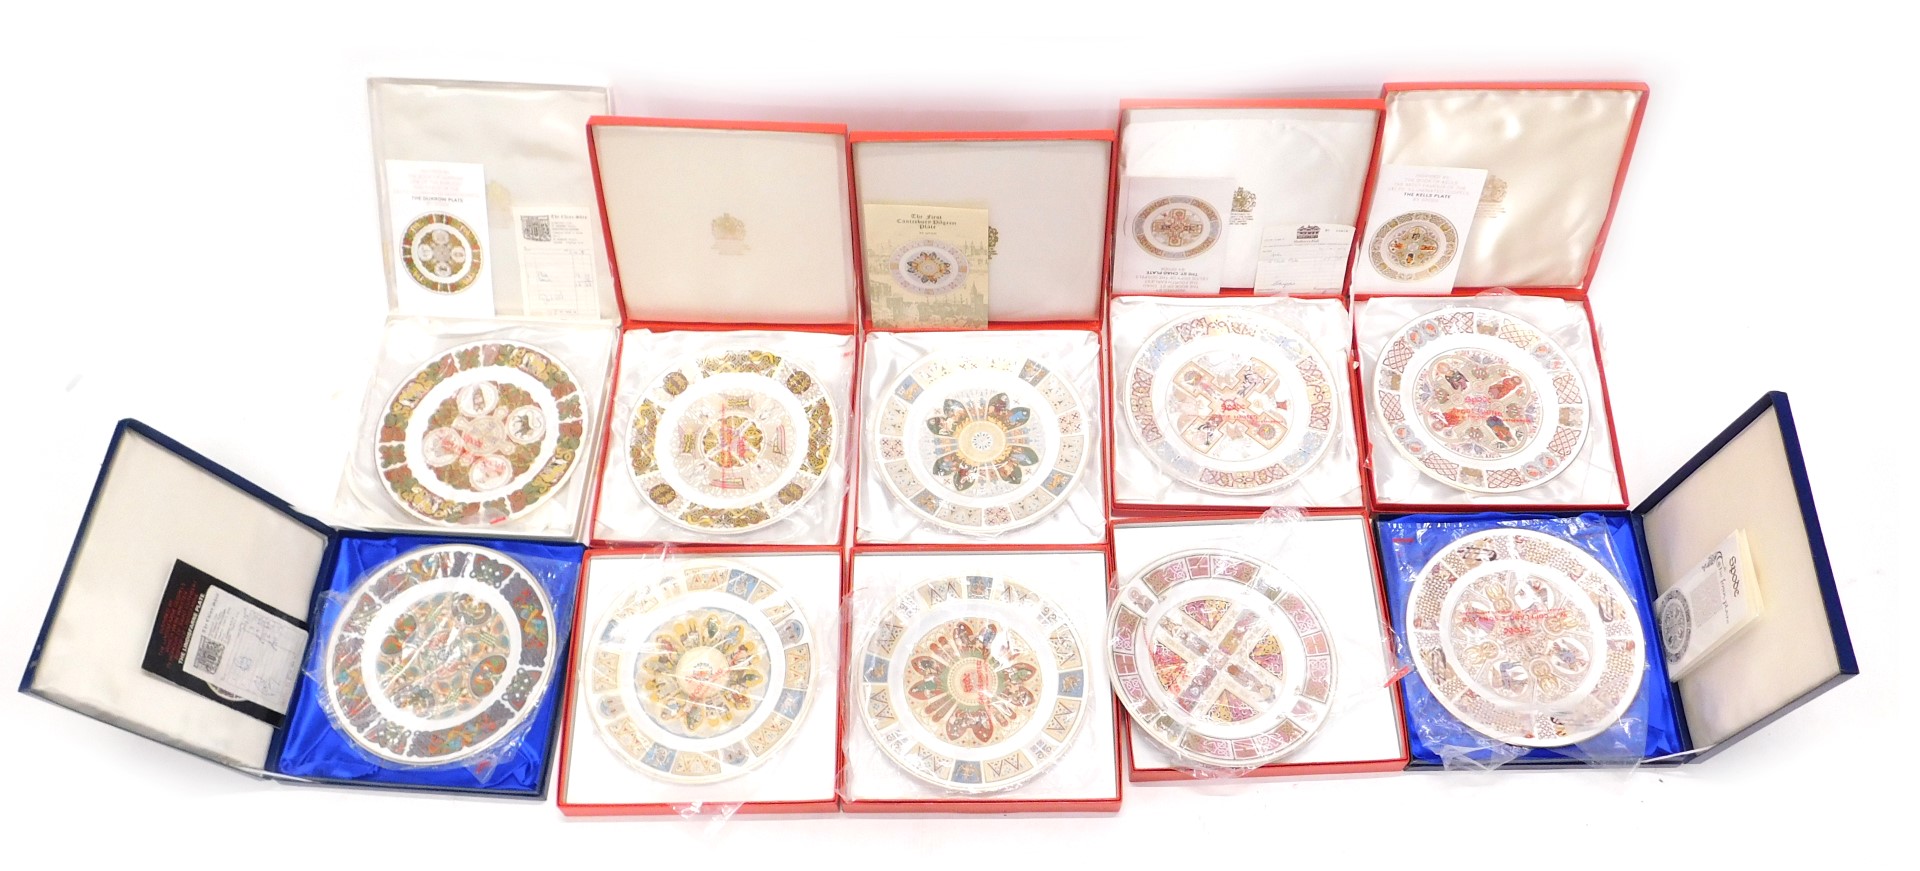 A collection of ten Spode porcelain plates, each related to an ecclesiastical building, to include T